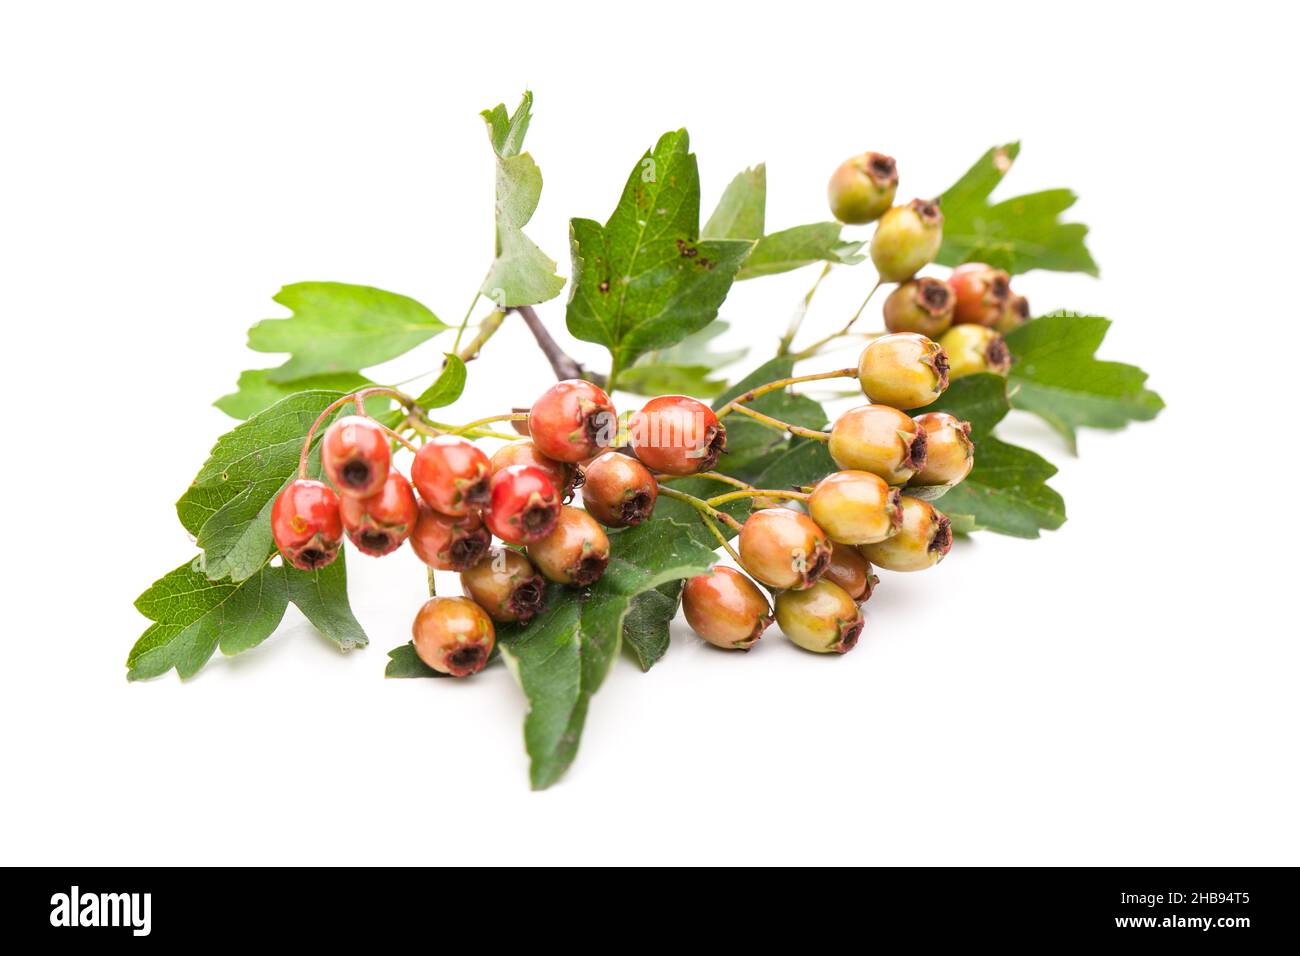 Hawthorn, red, berries, white, leaves, branch, branch, many, lying, Crataegus monogyna, closed, isolated, isolated, close, whole, medicinal herb, fres Stock Photo